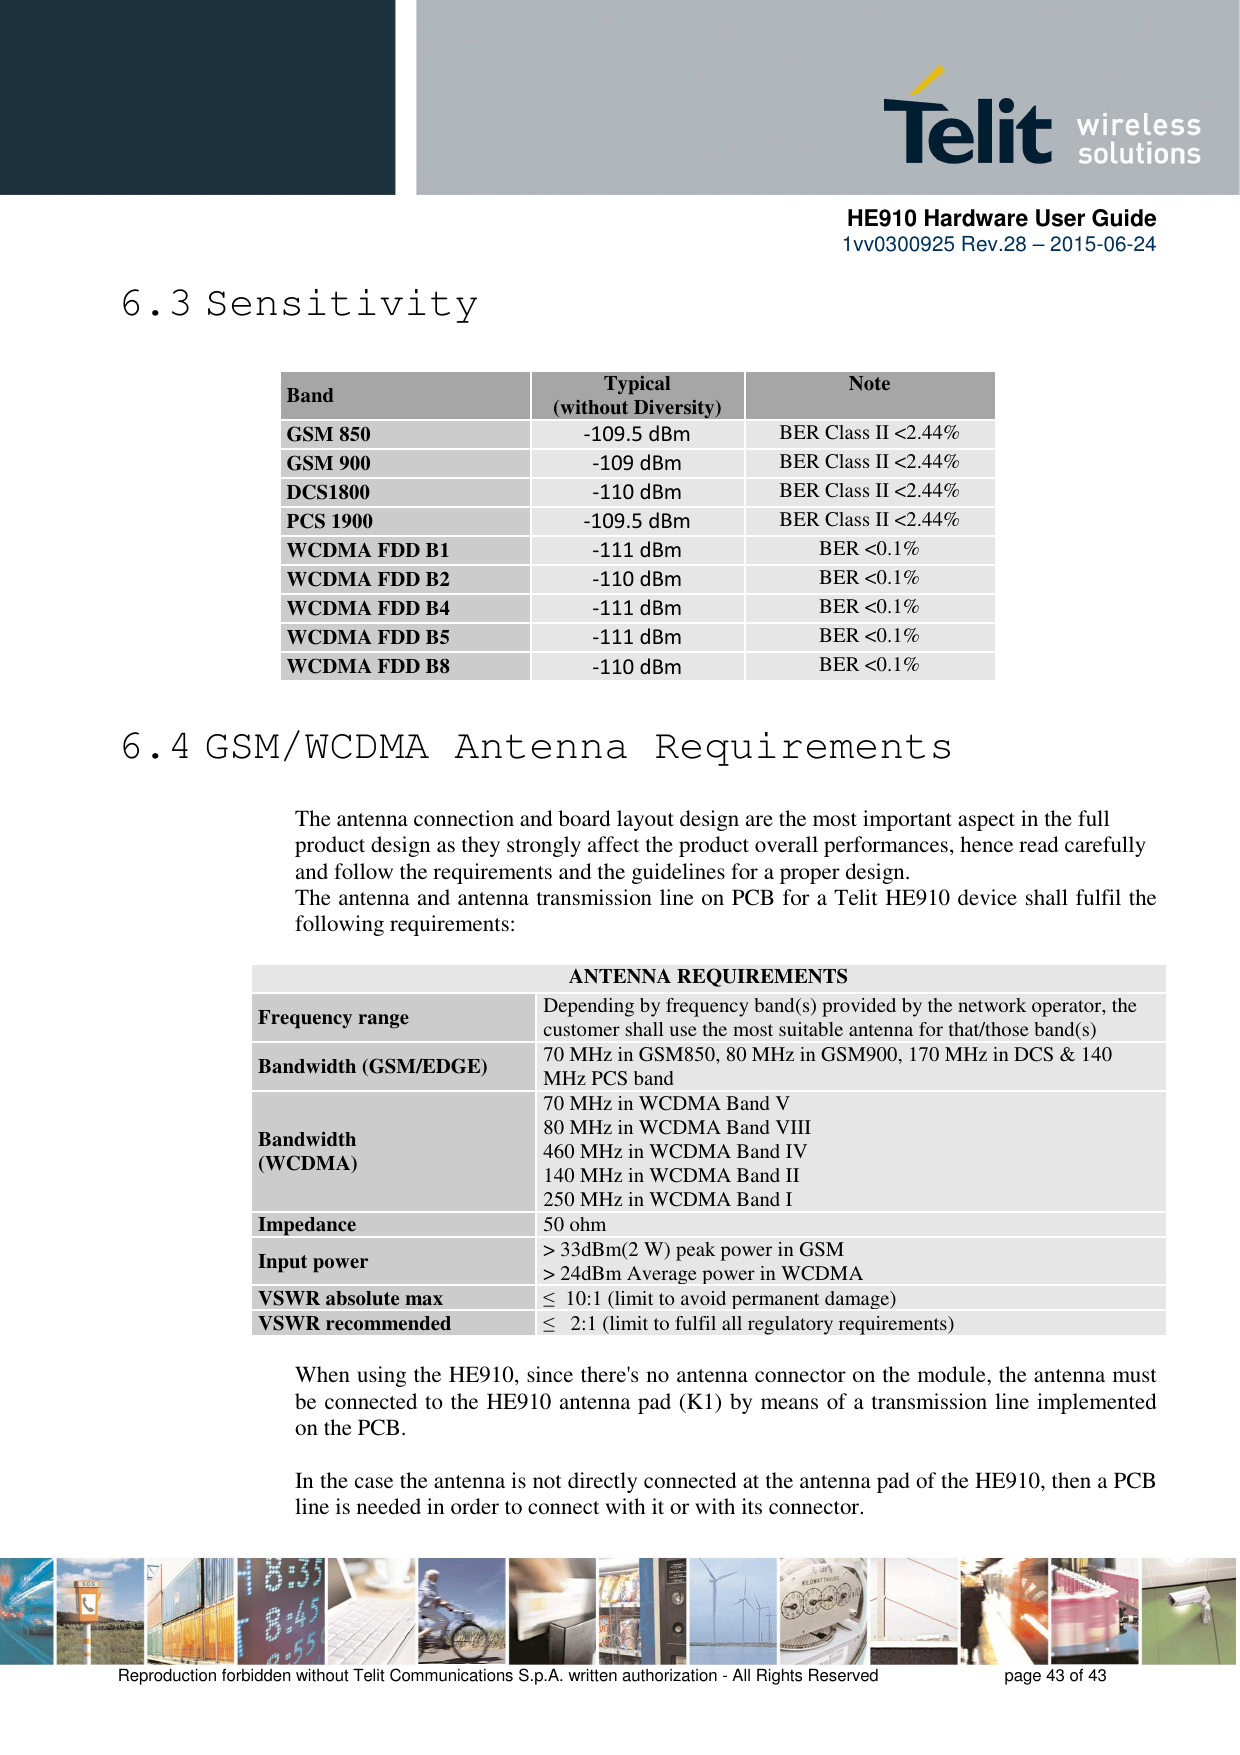      HE910 Hardware User Guide 1vv0300925 Rev.28 – 2015-06-24    Reproduction forbidden without Telit Communications S.p.A. written authorization - All Rights Reserved    page 43 of 43  6.3 Sensitivity              6.4 GSM/WCDMA Antenna Requirements The antenna connection and board layout design are the most important aspect in the full product design as they strongly affect the product overall performances, hence read carefully and follow the requirements and the guidelines for a proper design. The antenna and antenna transmission line on PCB for a Telit HE910 device shall fulfil the following requirements:   ANTENNA REQUIREMENTS Frequency range  Depending by frequency band(s) provided by the network operator, the customer shall use the most suitable antenna for that/those band(s) Bandwidth (GSM/EDGE)  70 MHz in GSM850, 80 MHz in GSM900, 170 MHz in DCS &amp; 140 MHz PCS band Bandwidth  (WCDMA) 70 MHz in WCDMA Band V 80 MHz in WCDMA Band VIII 460 MHz in WCDMA Band IV  140 MHz in WCDMA Band II 250 MHz in WCDMA Band I Impedance  50 ohm Input power  &gt; 33dBm(2 W) peak power in GSM &gt; 24dBm Average power in WCDMA VSWR absolute max  ≤  10:1 (limit to avoid permanent damage) VSWR recommended  ≤   2:1 (limit to fulfil all regulatory requirements)  When using the HE910, since there&apos;s no antenna connector on the module, the antenna must be connected to the HE910 antenna pad (K1) by means of a transmission line implemented on the PCB.  In the case the antenna is not directly connected at the antenna pad of the HE910, then a PCB line is needed in order to connect with it or with its connector.  Band  Typical  (without Diversity) Note GSM 850 -109.5 dBm BER Class II &lt;2.44% GSM 900 -109 dBm BER Class II &lt;2.44% DCS1800 -110 dBm BER Class II &lt;2.44% PCS 1900 -109.5 dBm BER Class II &lt;2.44% WCDMA FDD B1 -111 dBm BER &lt;0.1% WCDMA FDD B2 -110 dBm BER &lt;0.1% WCDMA FDD B4 -111 dBm BER &lt;0.1% WCDMA FDD B5 -111 dBm BER &lt;0.1% WCDMA FDD B8 -110 dBm BER &lt;0.1% 